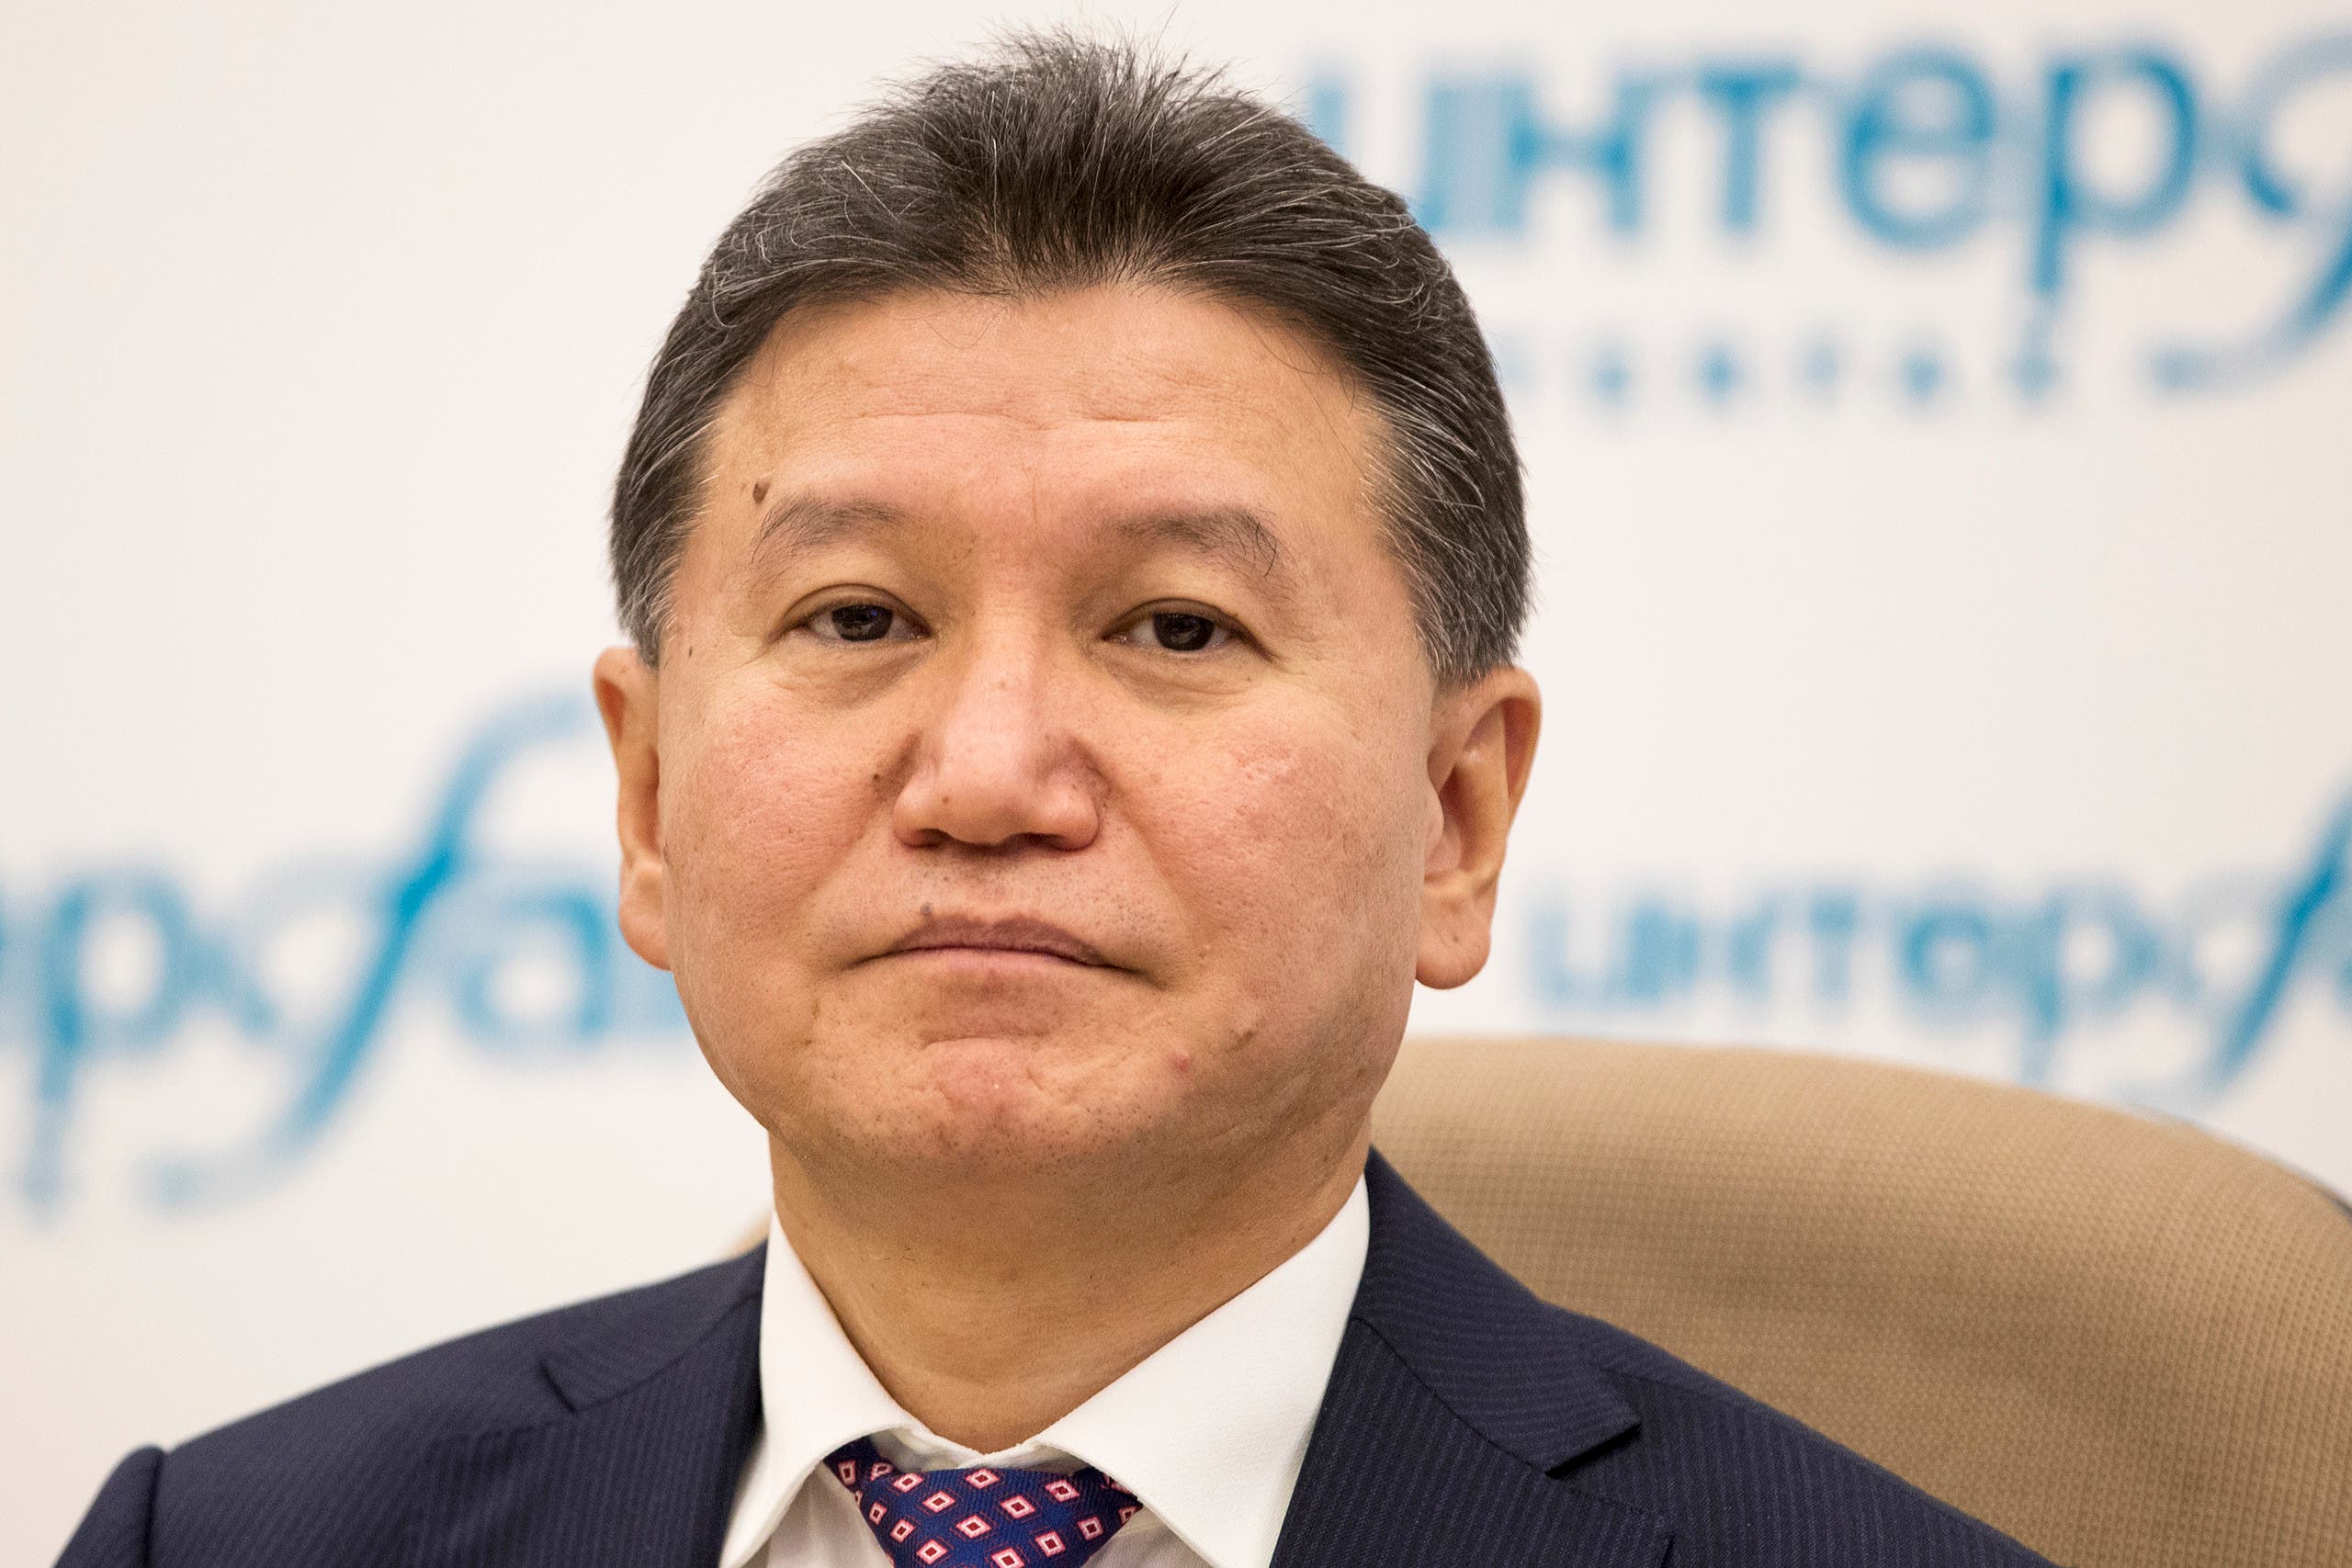 Kirsan Ilyumzhinov, as the president of the World Chess Federation, attended a news conference in Moscow, Russia, Thursday, Nov. 10, 2016. (AP)